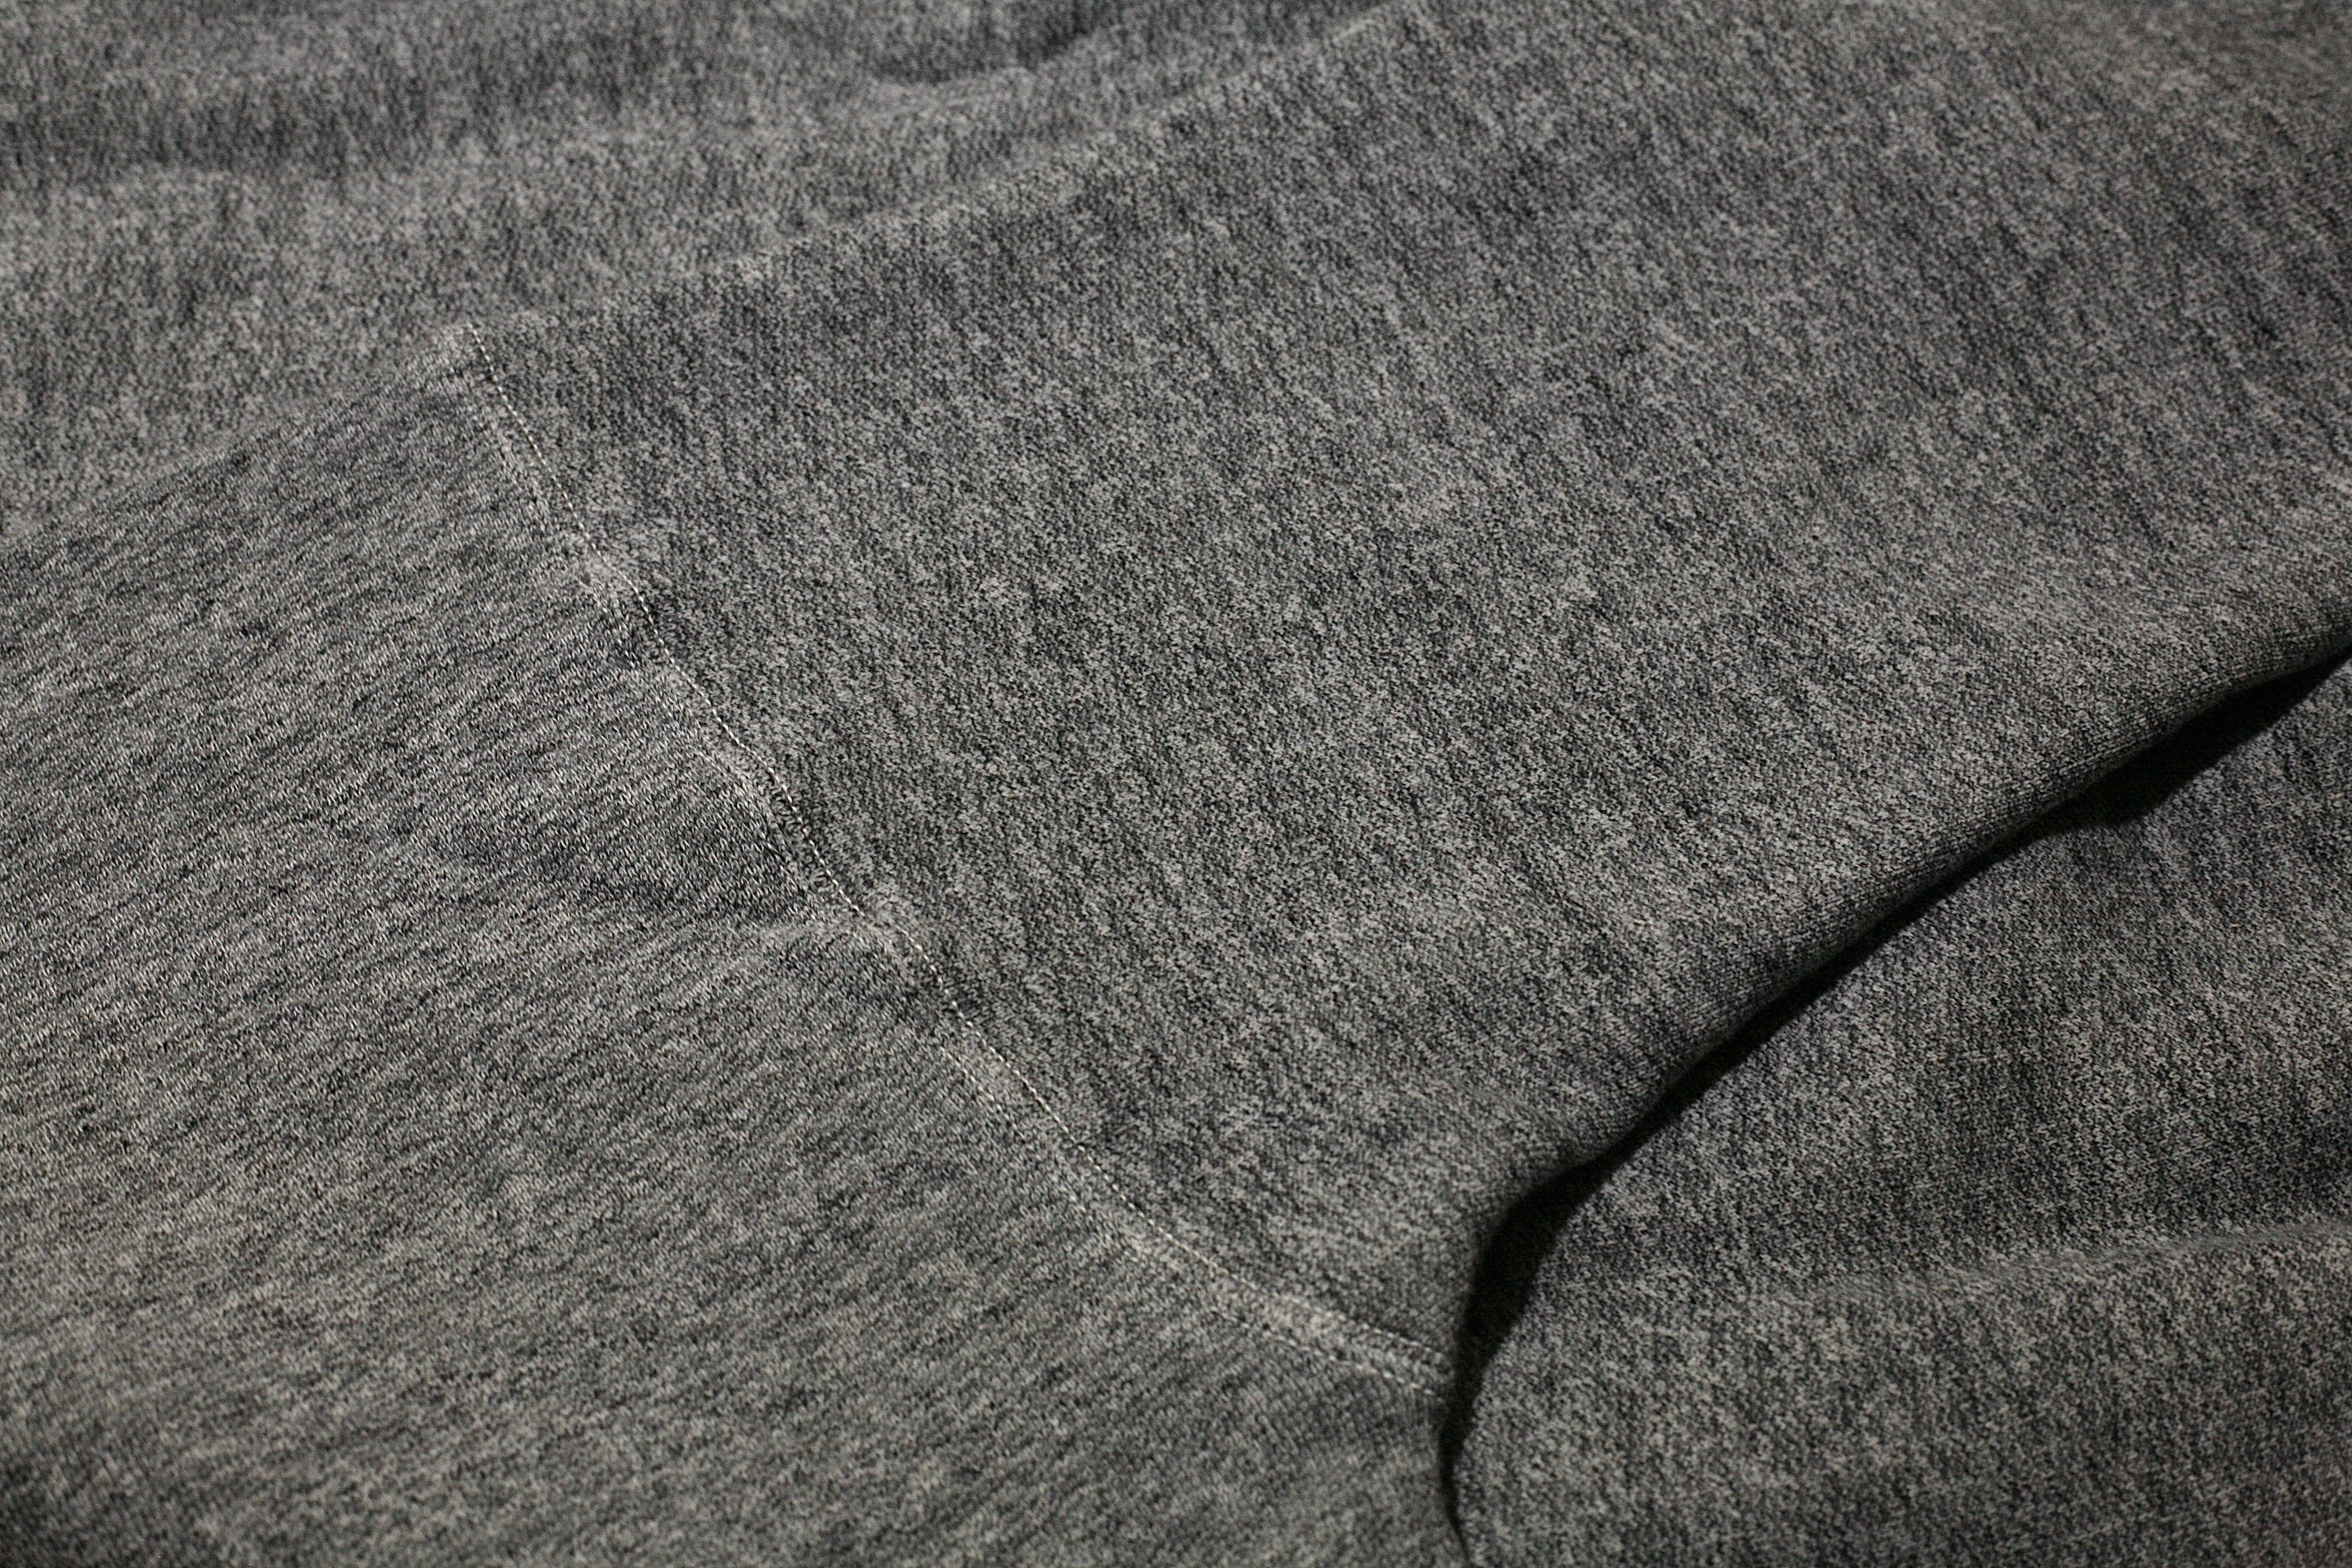 EQP001 Crew Neck Long Sleeve in Top Charcoal